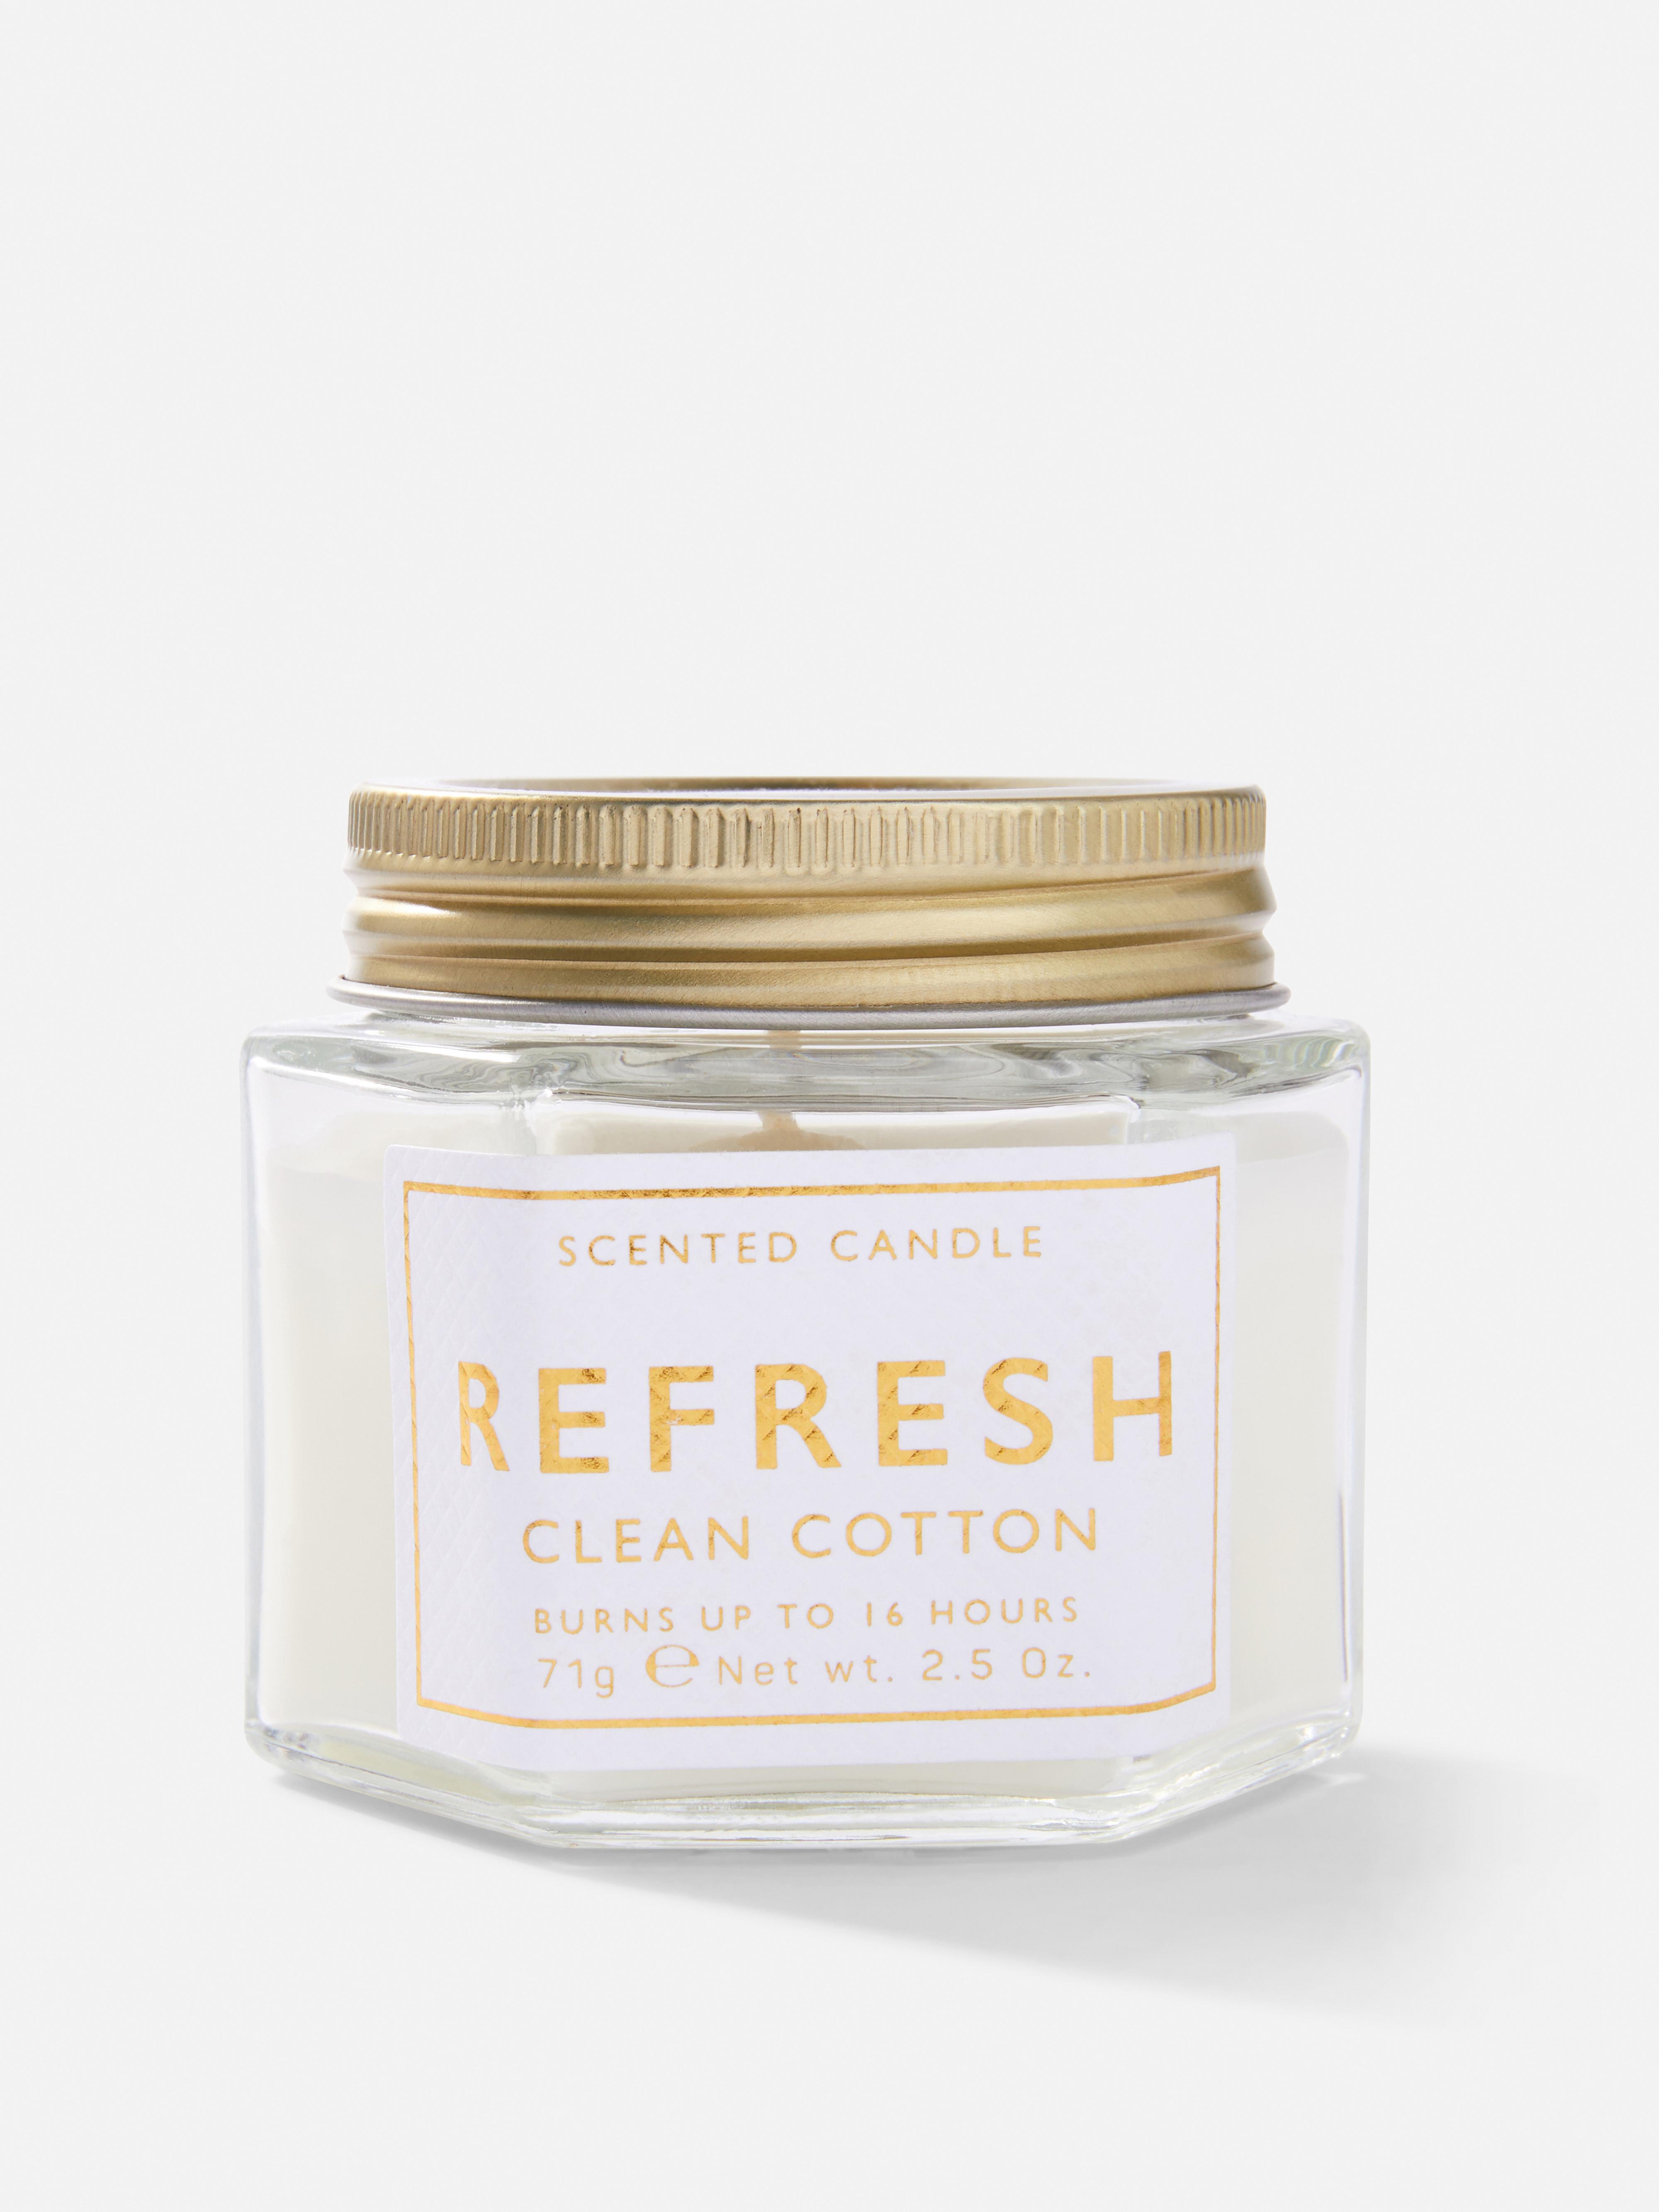 Refresh Clean Cotton Scented Candle